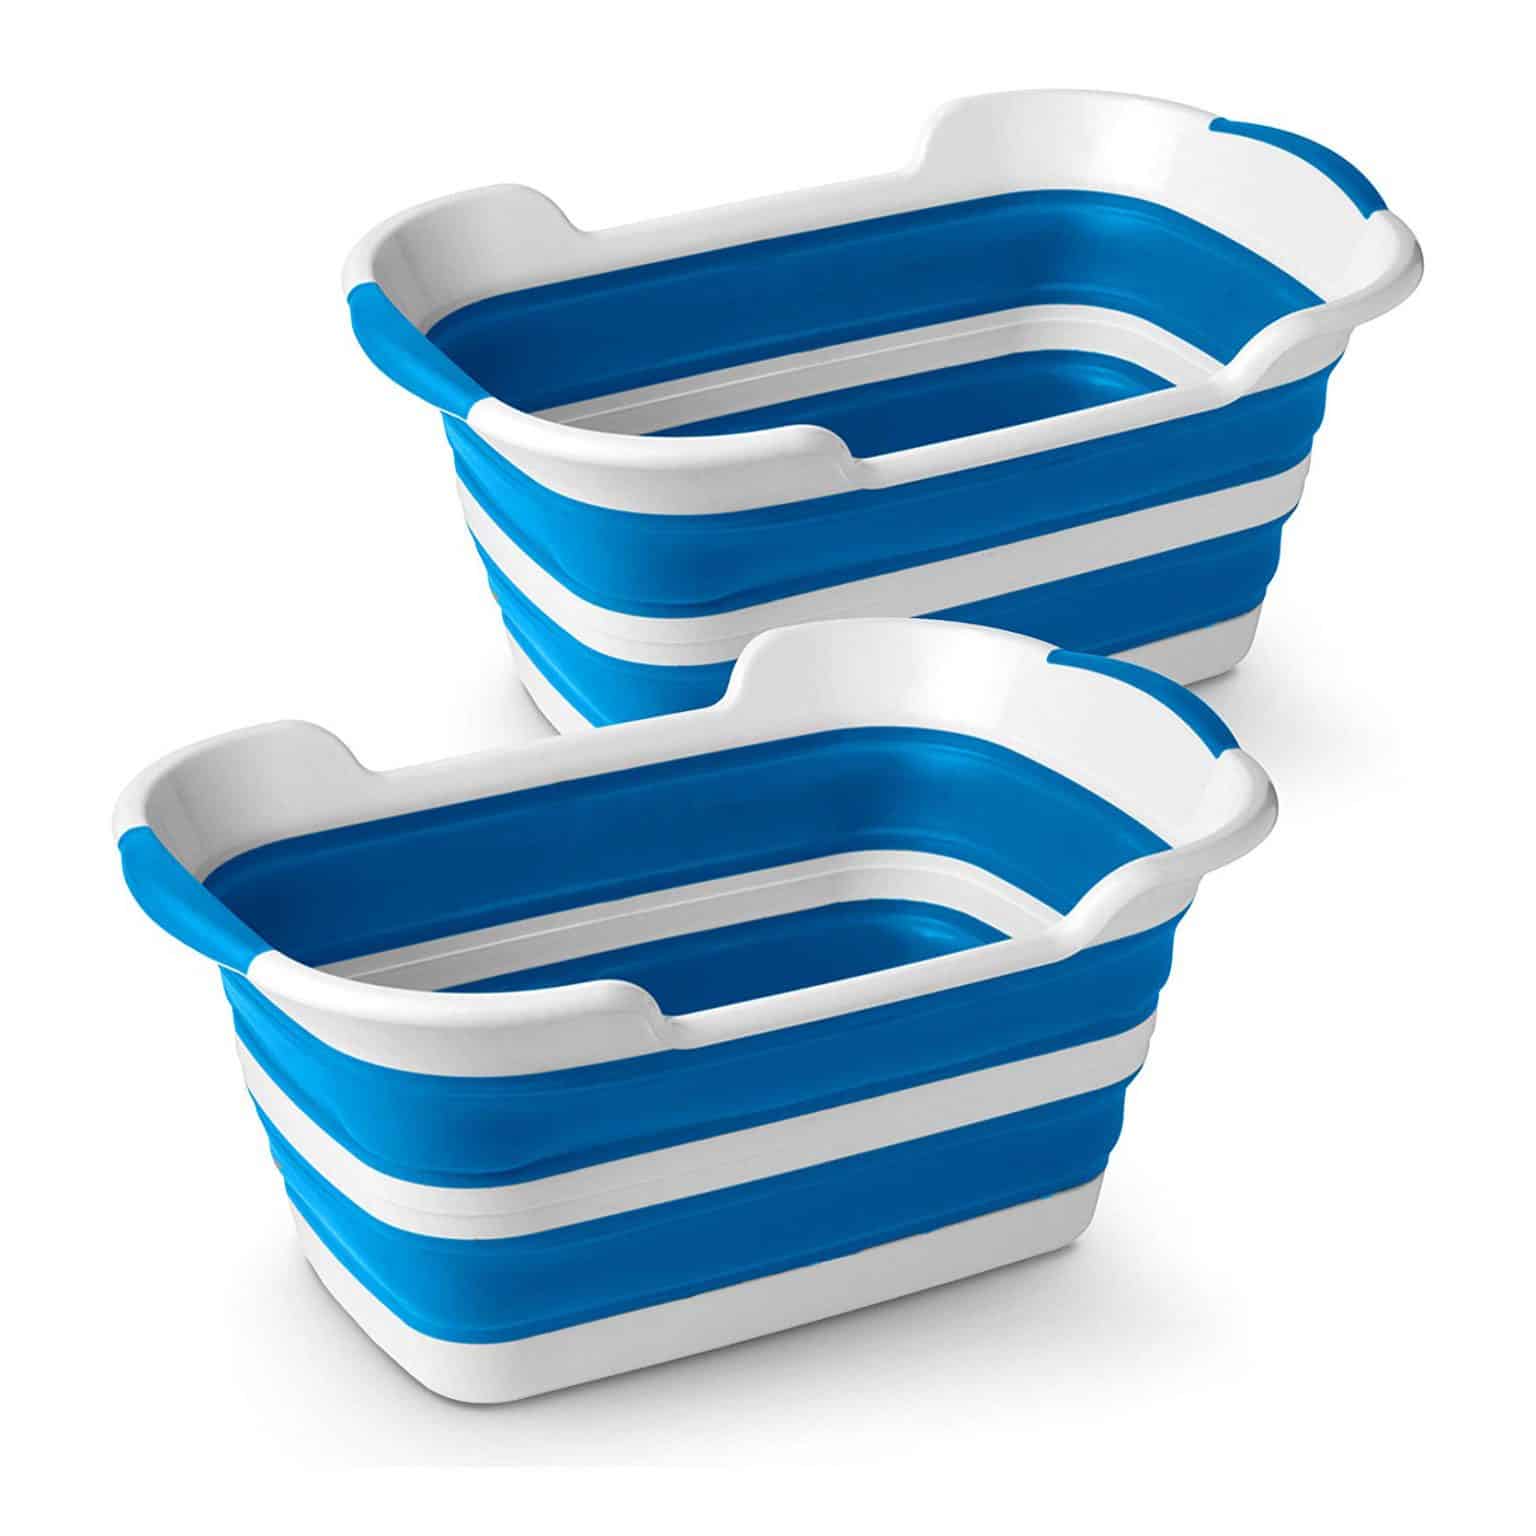 collapsible laundry basket target